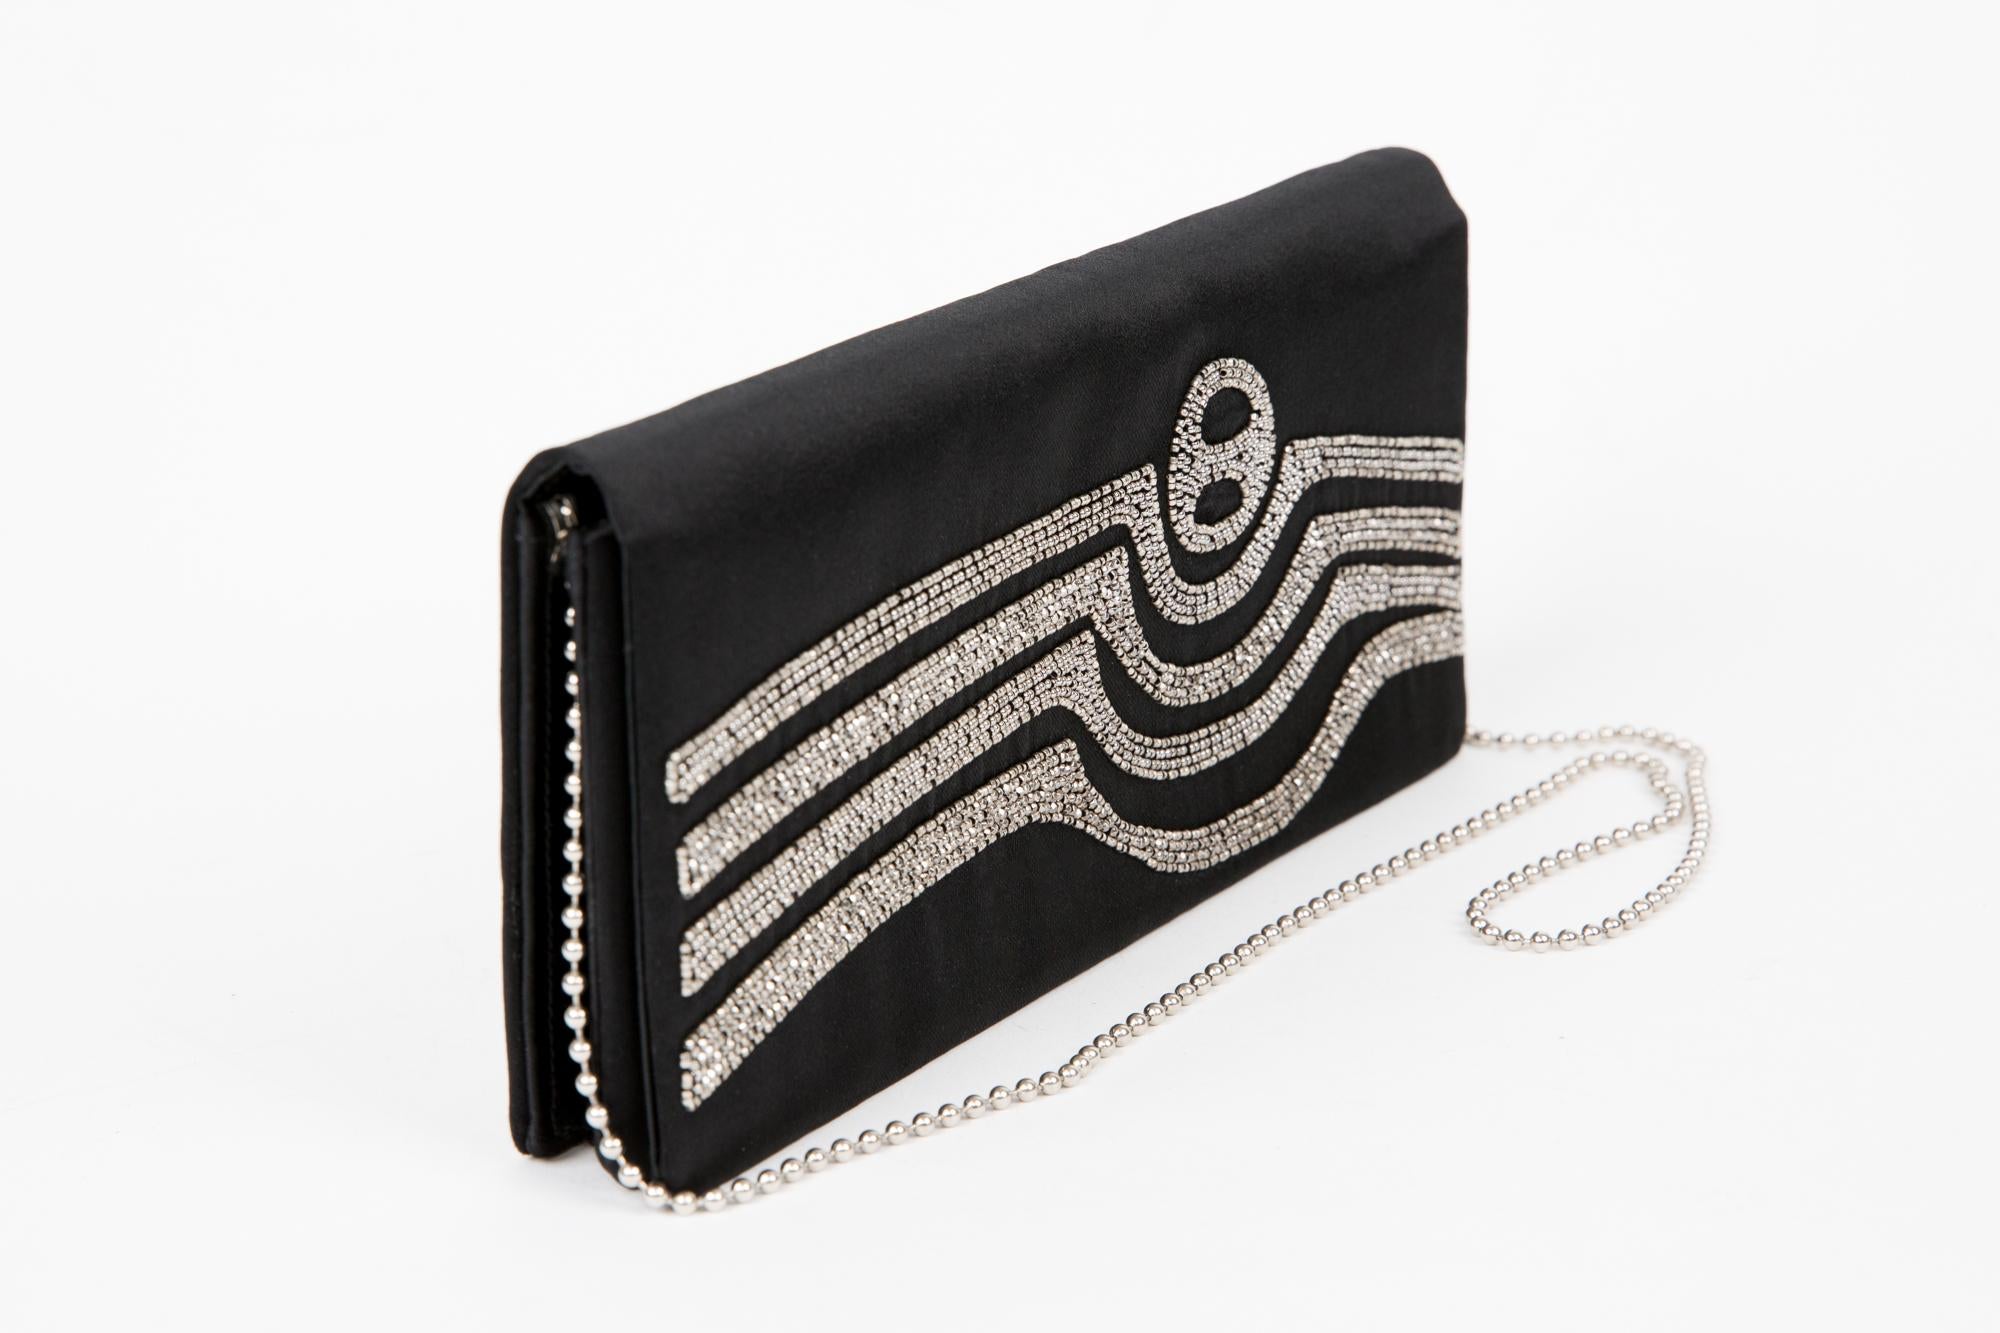 Pierre Cardin black silk evening clutch bag featuring front embroidered, silver-tone hardware and shoulder chain strap, a snap under the front flap,  an inside  stamp. Delivered in original box.
In good vintage condition. Made in France. 
Length: